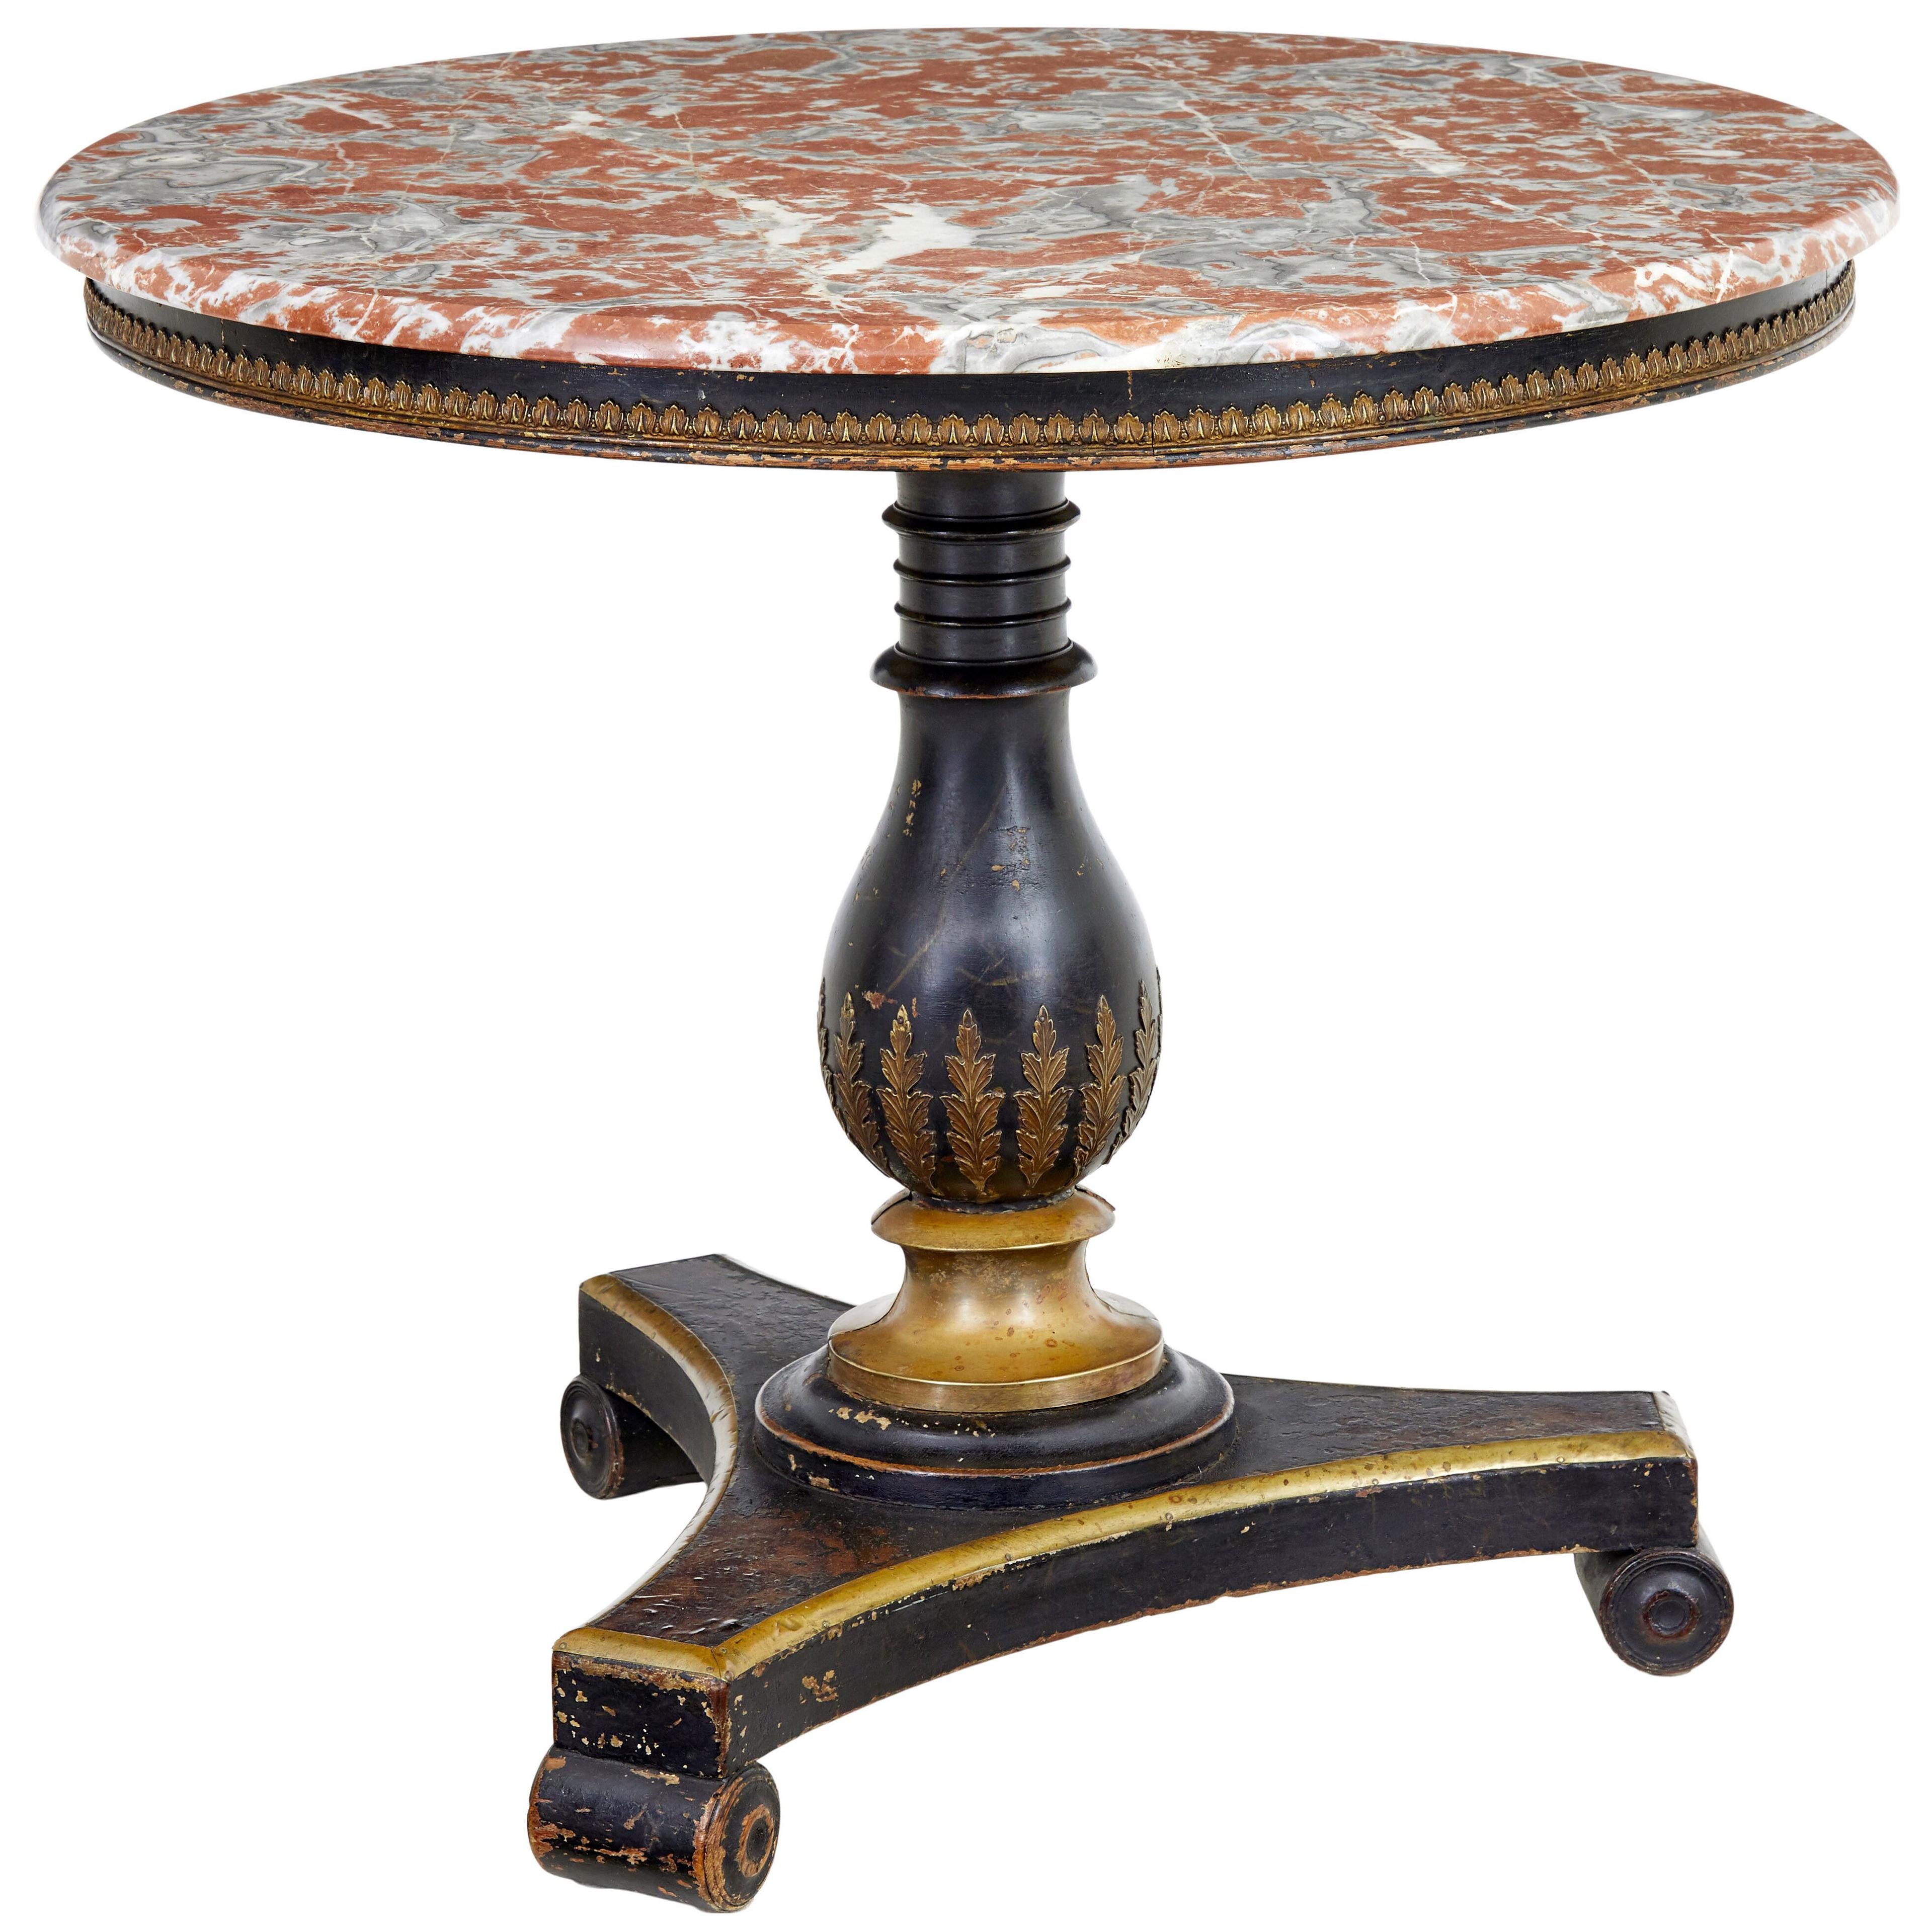 19TH CENTURY EBONISED MARBLE TOP CENTRE TABLE